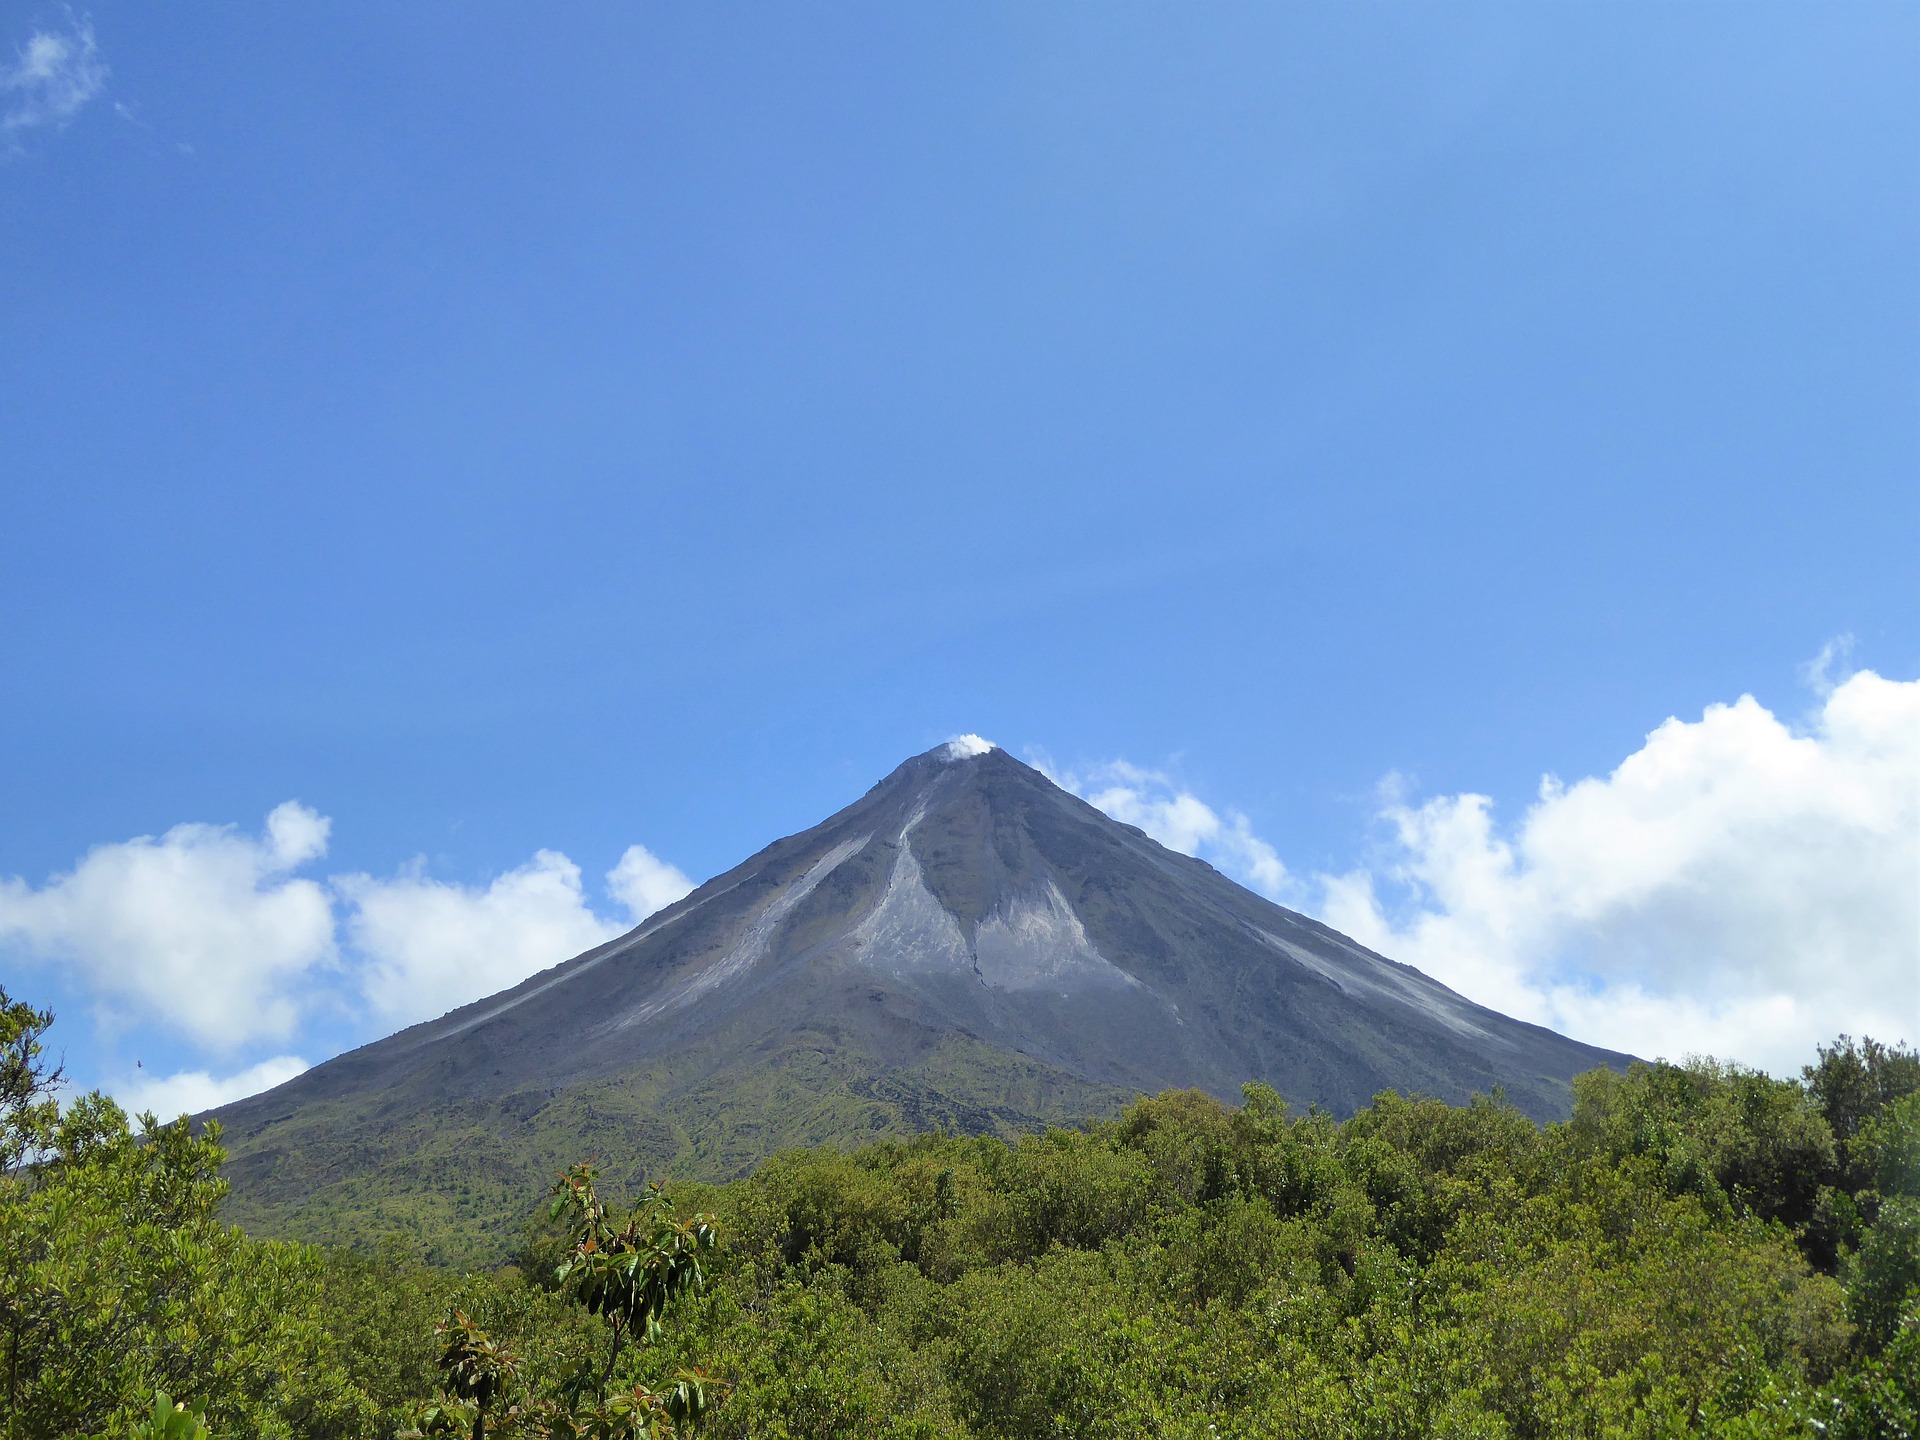 Arenal Volcano in Costa Rica (Photo Credit: MillerGruppe from Pixabay)